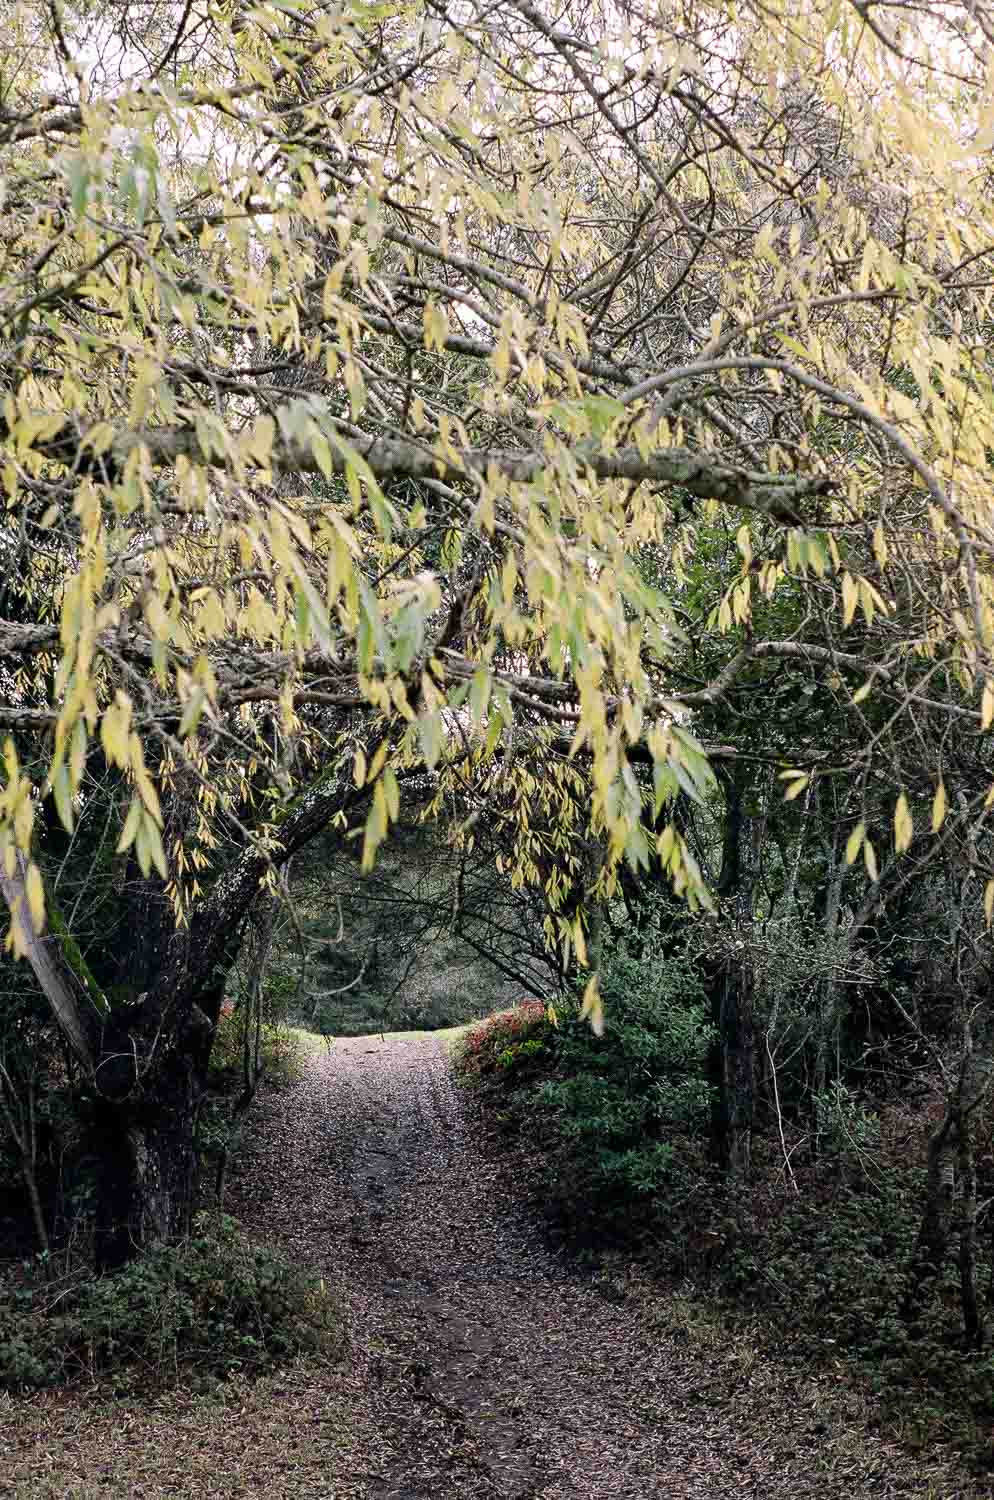 Dirt path winding through a tranquil forest with overhanging branches bearing yellow leaves.